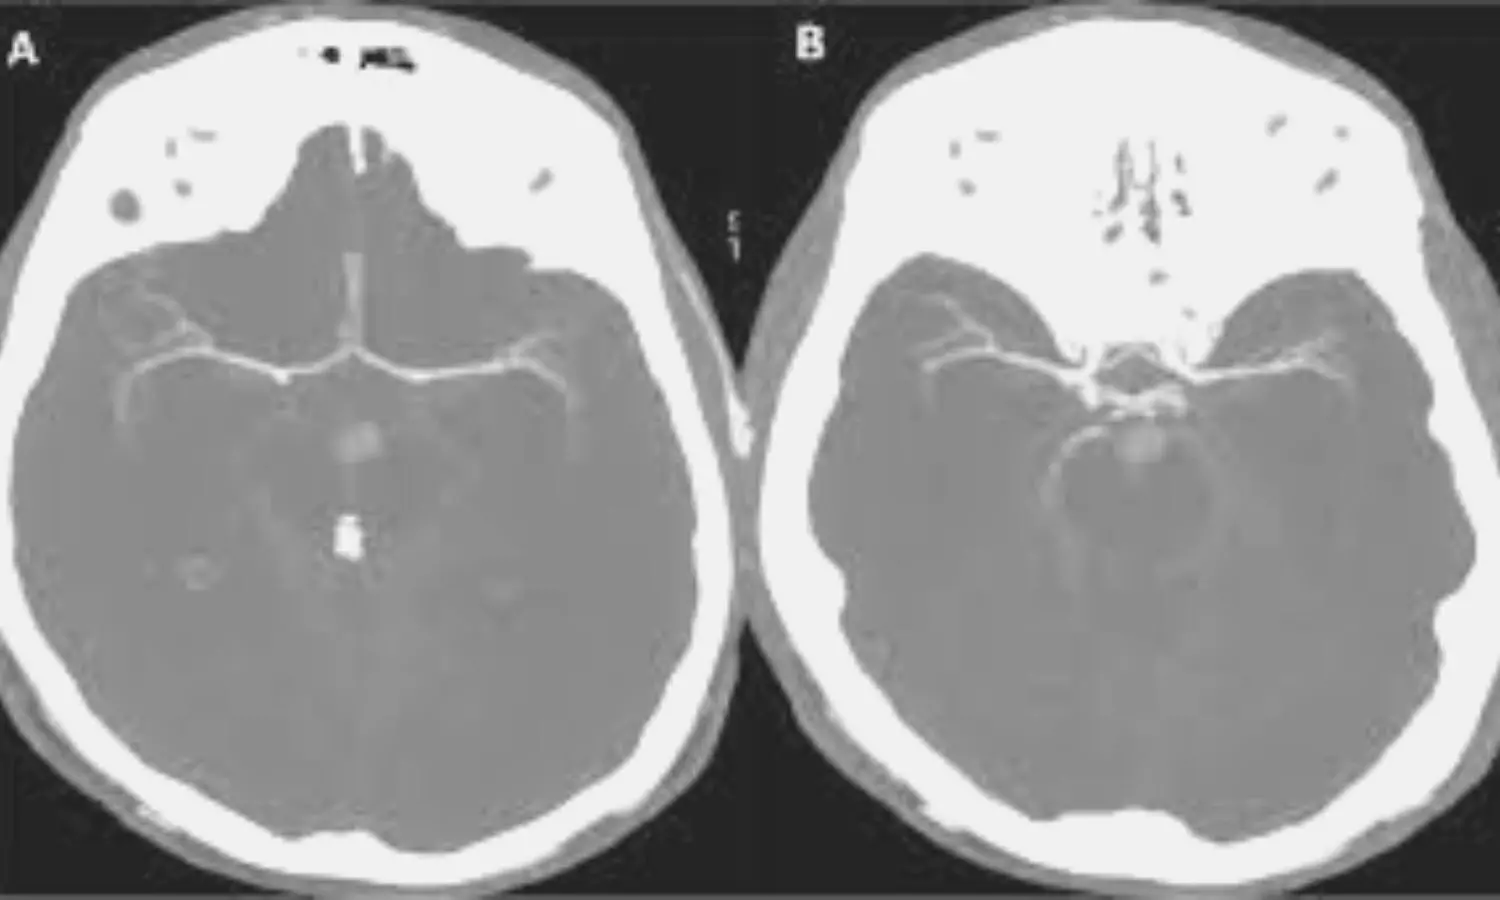 Use cerebral CT angiography to support clinical diagnosis of death using neurological criteria: Consensus statement